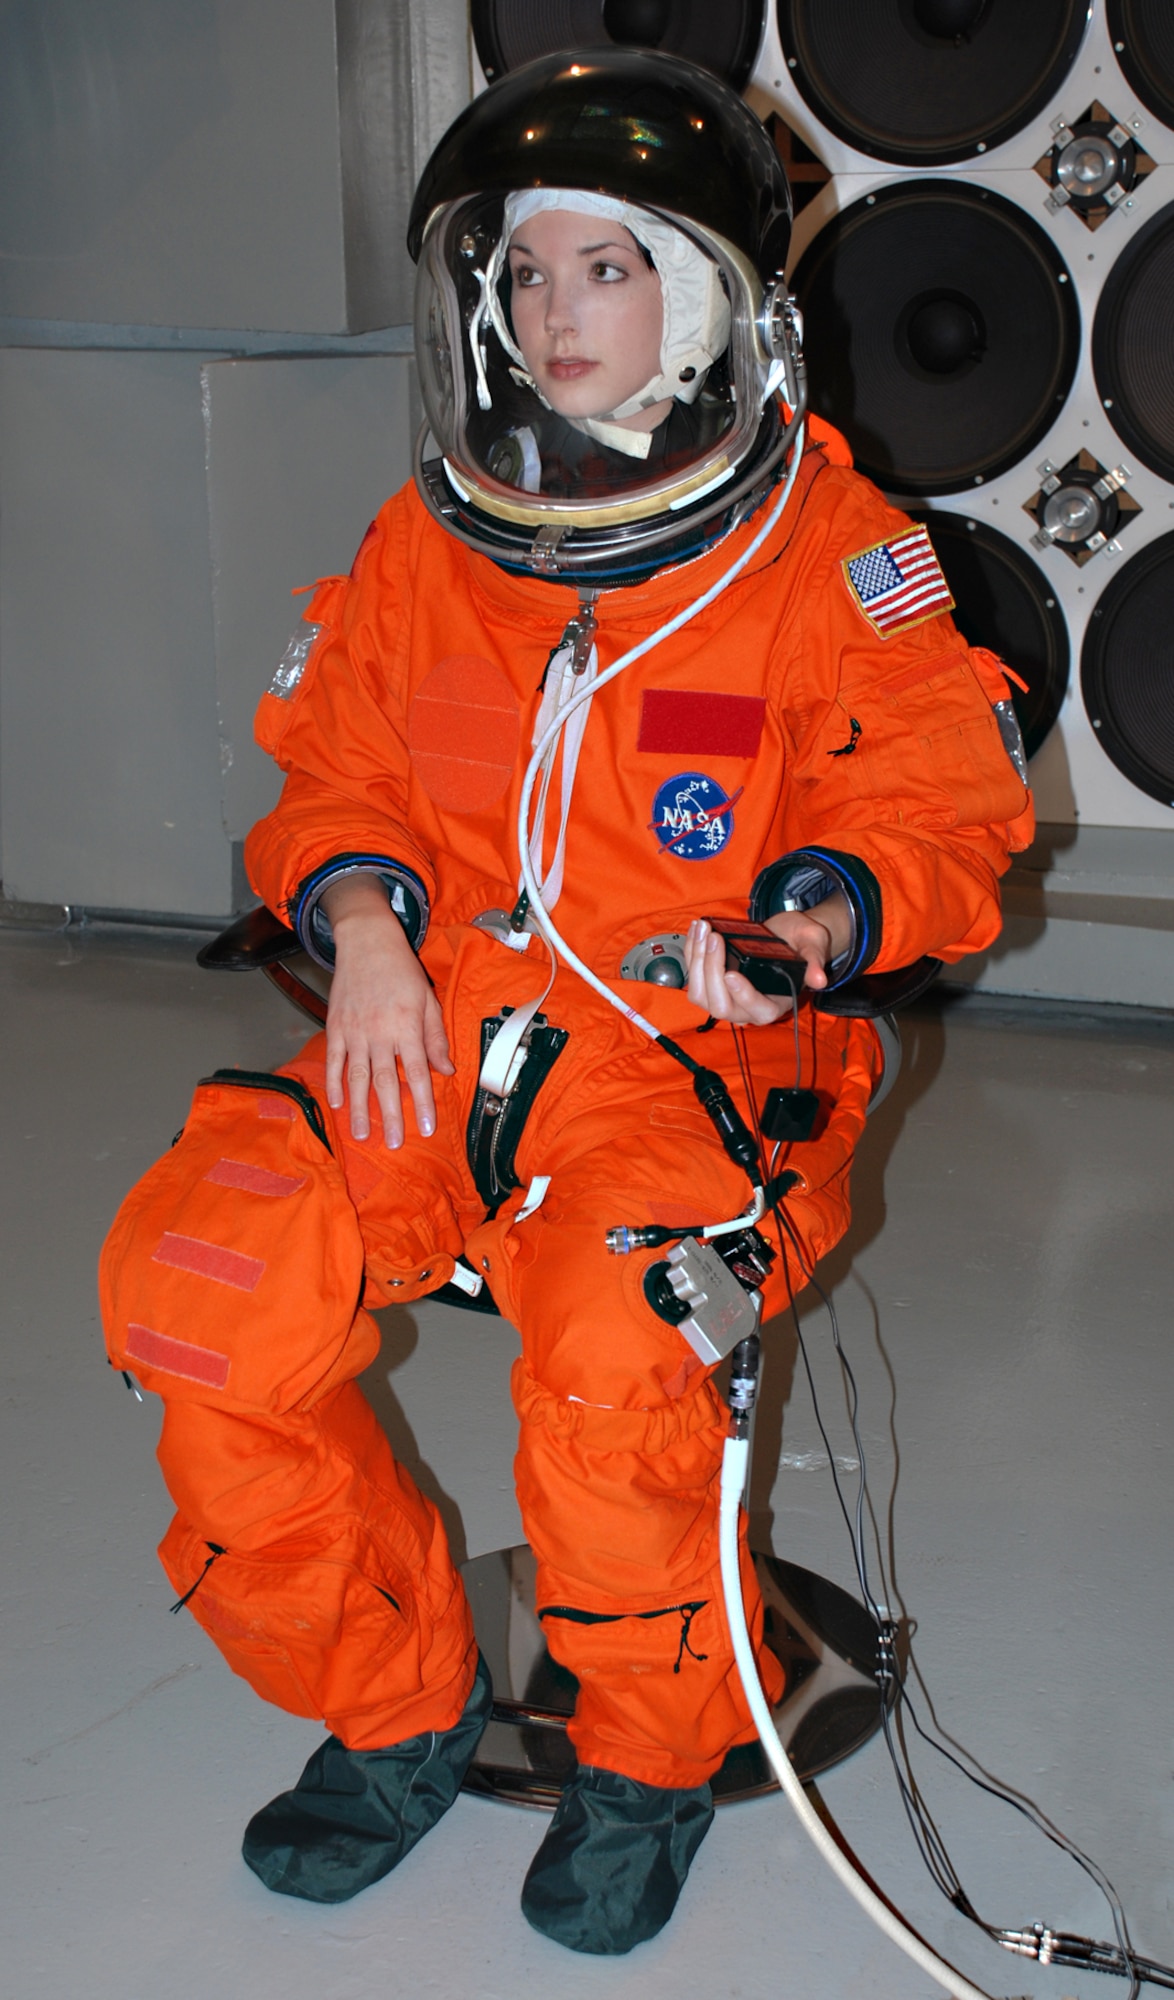 Wearing a NASA advanced crew escape suit, test subject Beth Greschner of General Dynamics Advanced Information Systems participates in an Air Force Research Laboratory study of a new communications system for space shuttle astronauts.